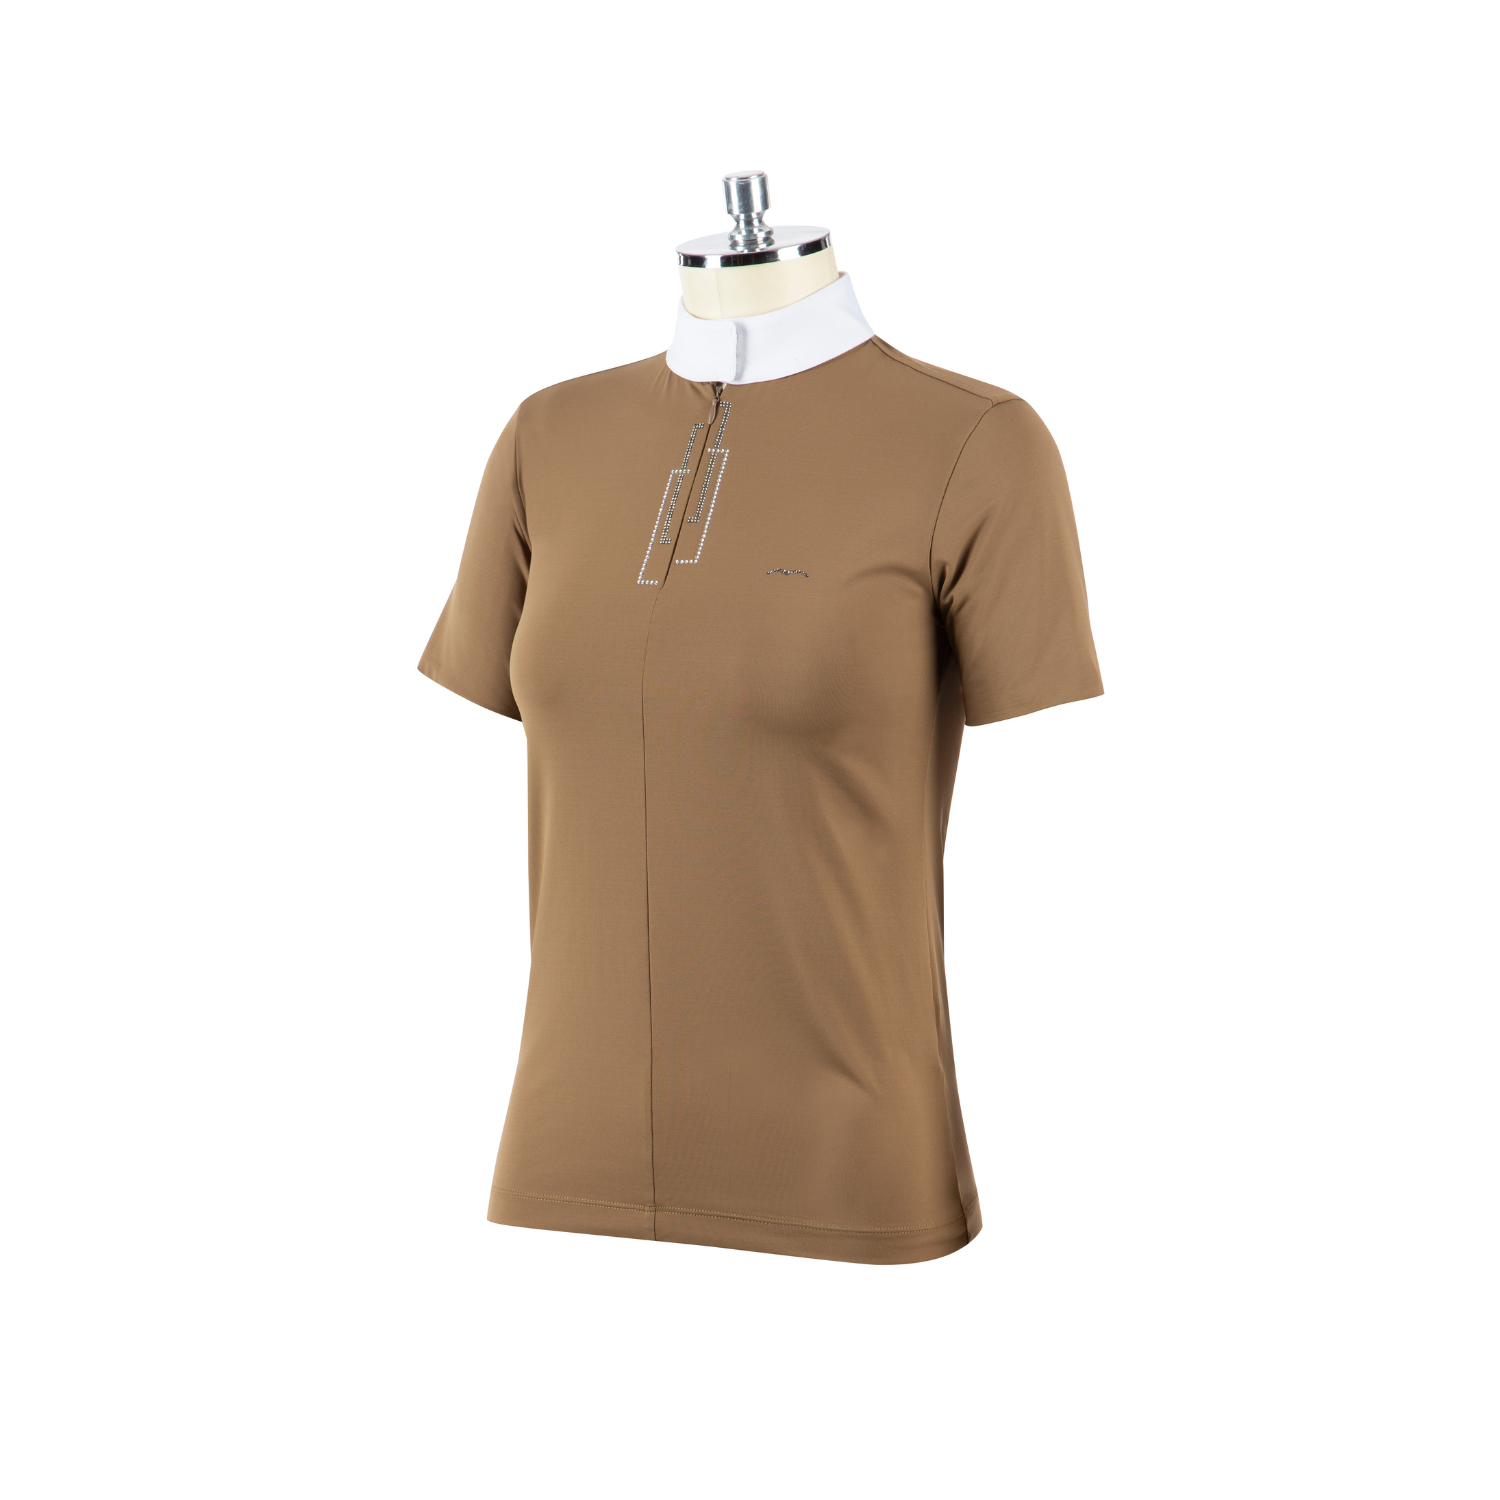 Ladies Buby Competition Show Shirt - Sand